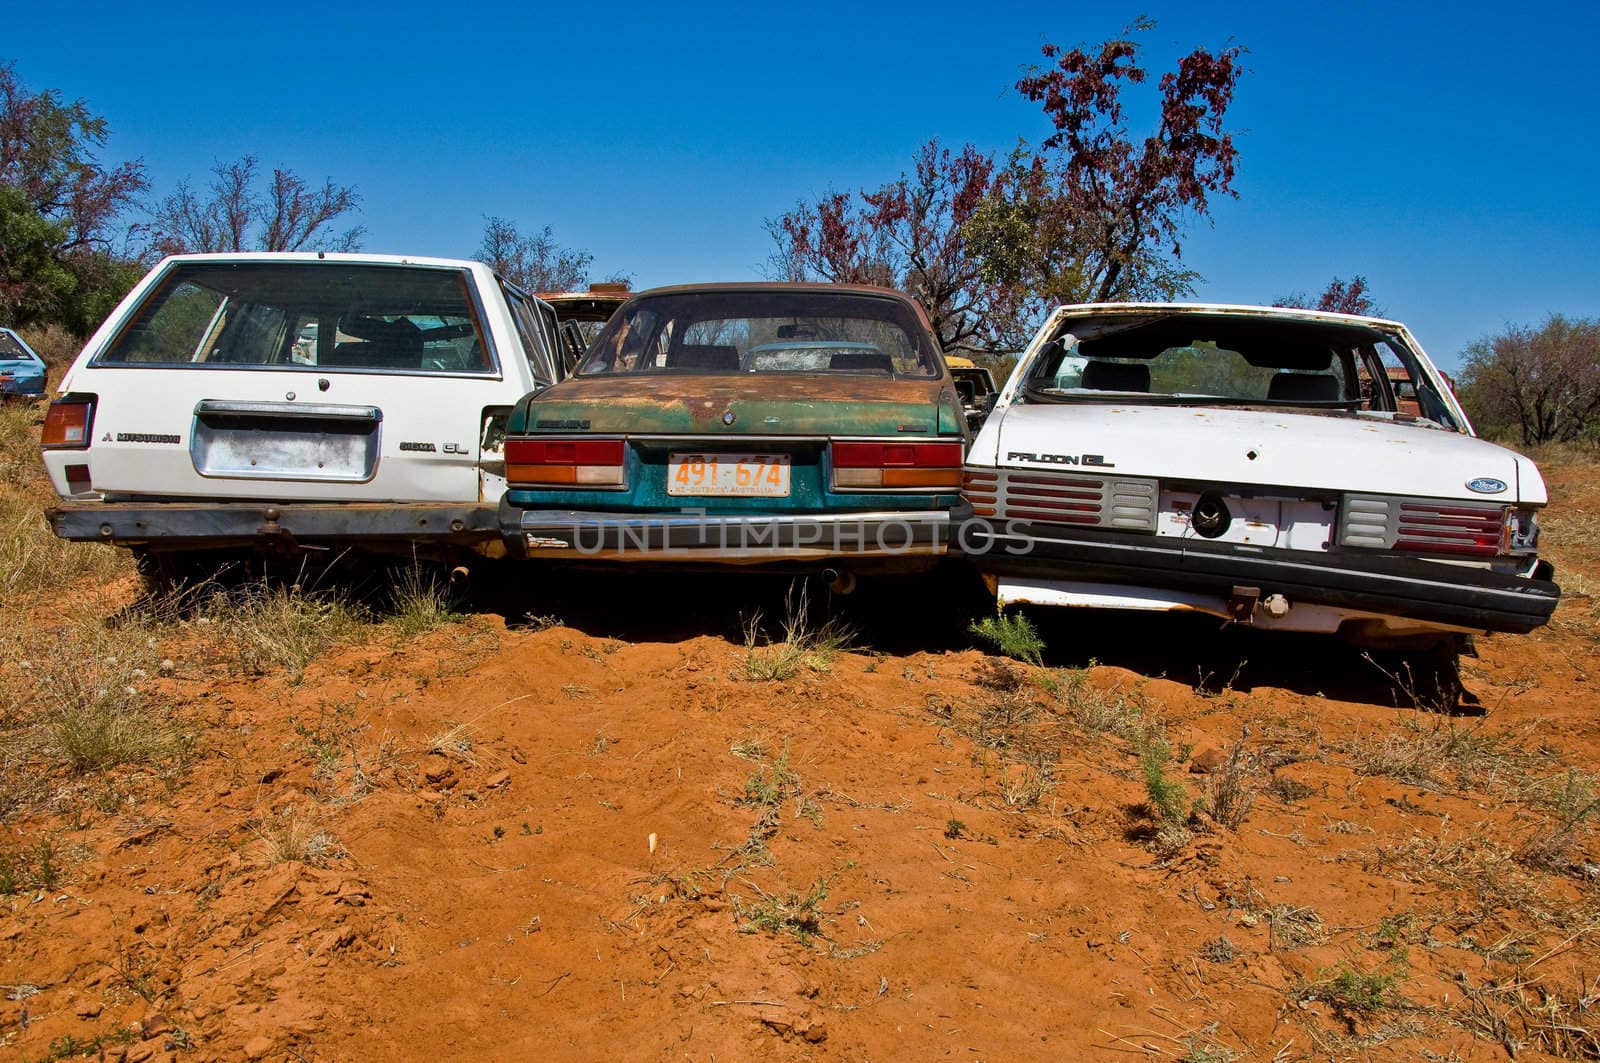 Wreck Cars in the outback australia, northern territory